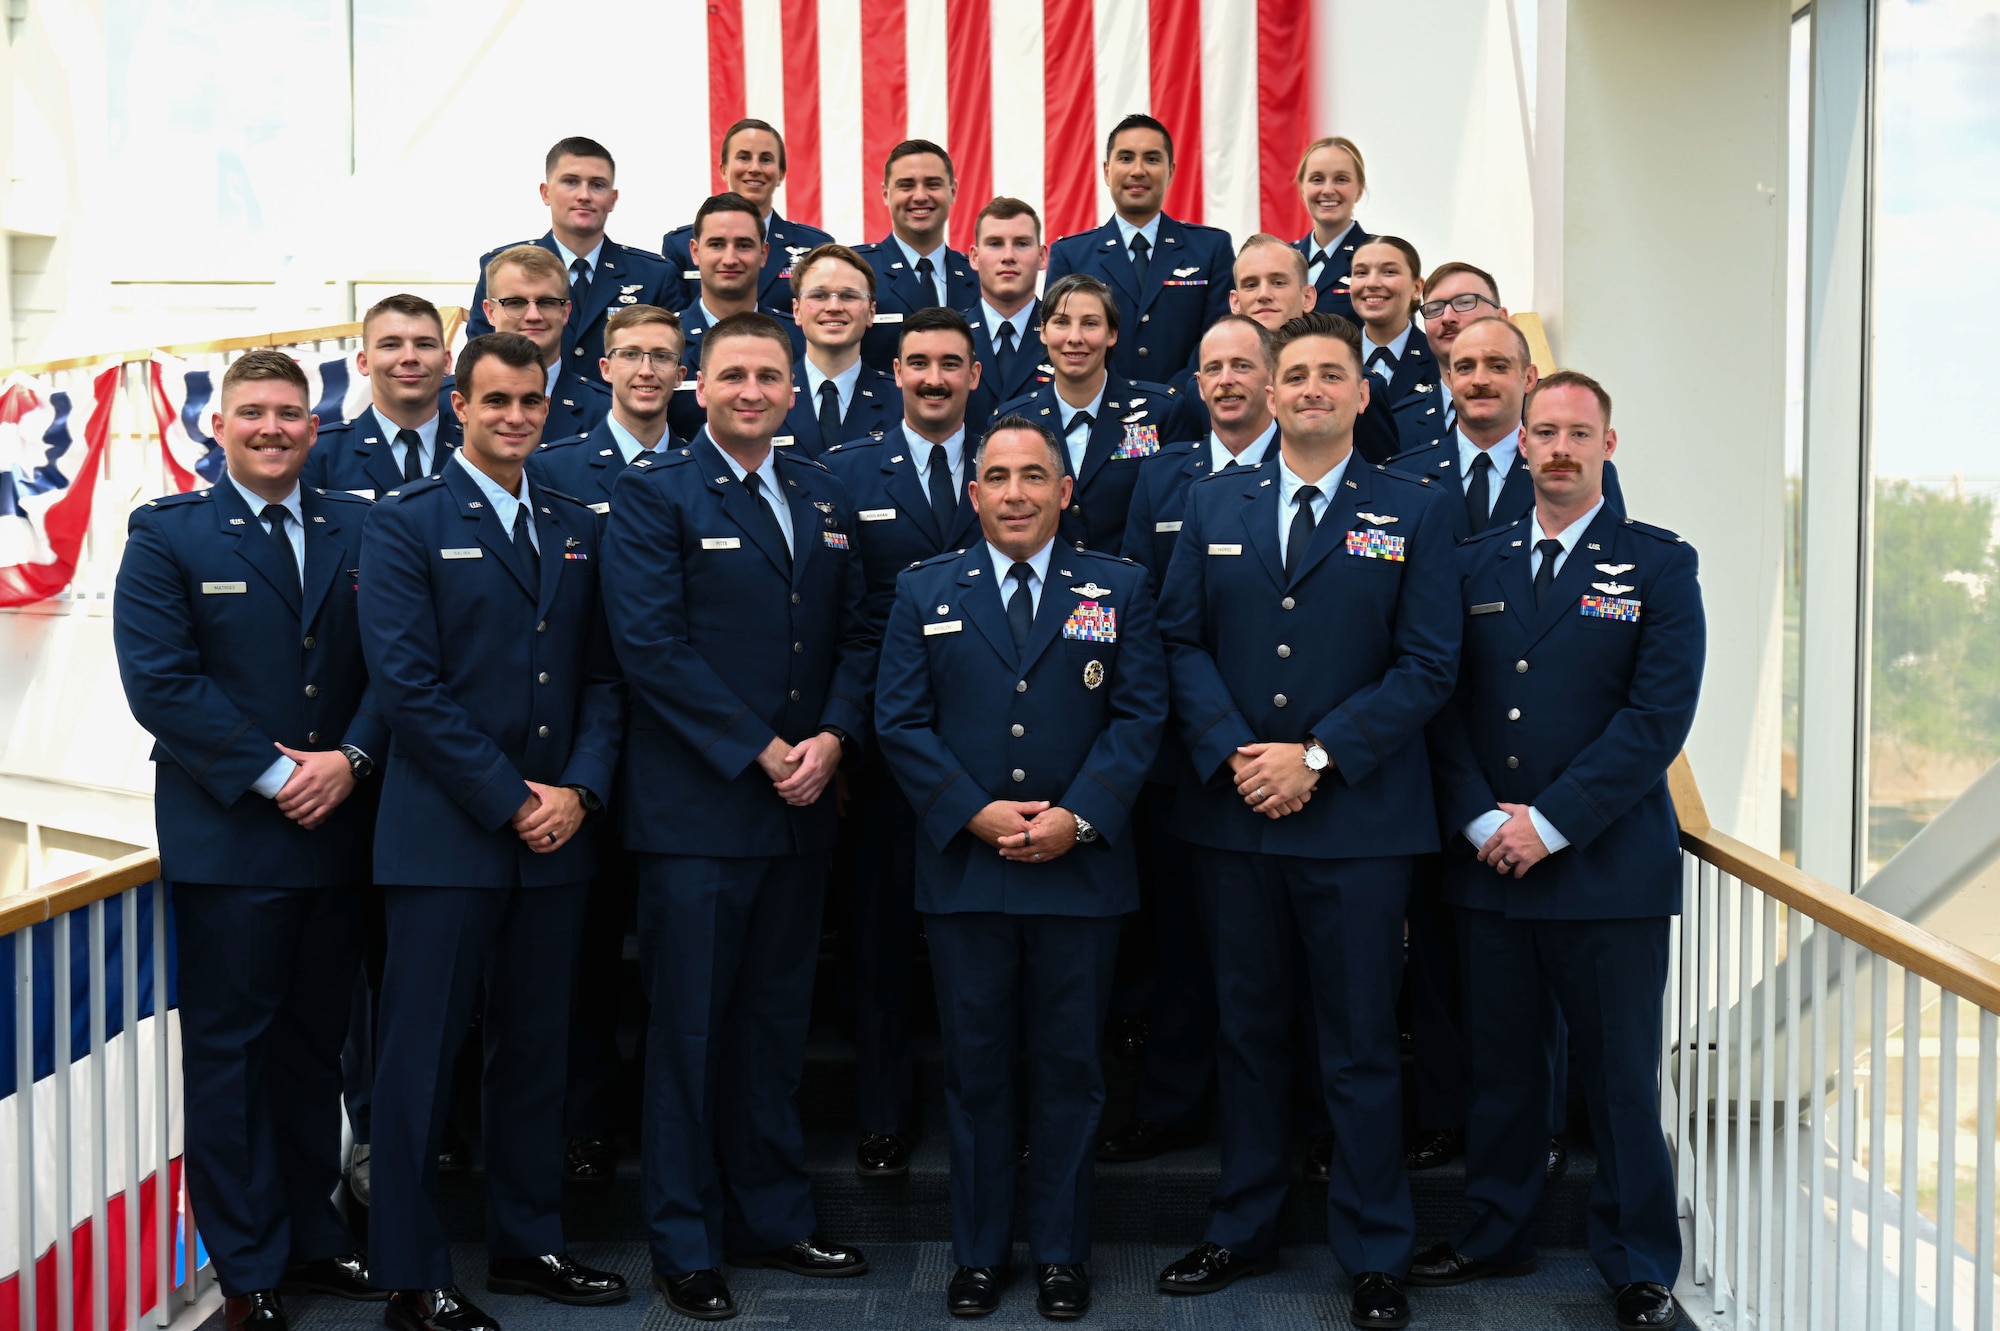 U.S. Air Force Col. Josh Koslov, 350th Spectrum Warfare Wing commander, center, poses for a photo with the graduating class at the Undergraduate Combat Systems Officer Training graduation at National Naval Aviation Museum, Naval Air Station Pensacola, Fla., Aug. 25, 2023. The 479th Flying Training Group conducts combat systems officer training for newly commissioned U.S. Air Force officers. (U.S. Air Force photo by Capt. Benjamin Aronson)